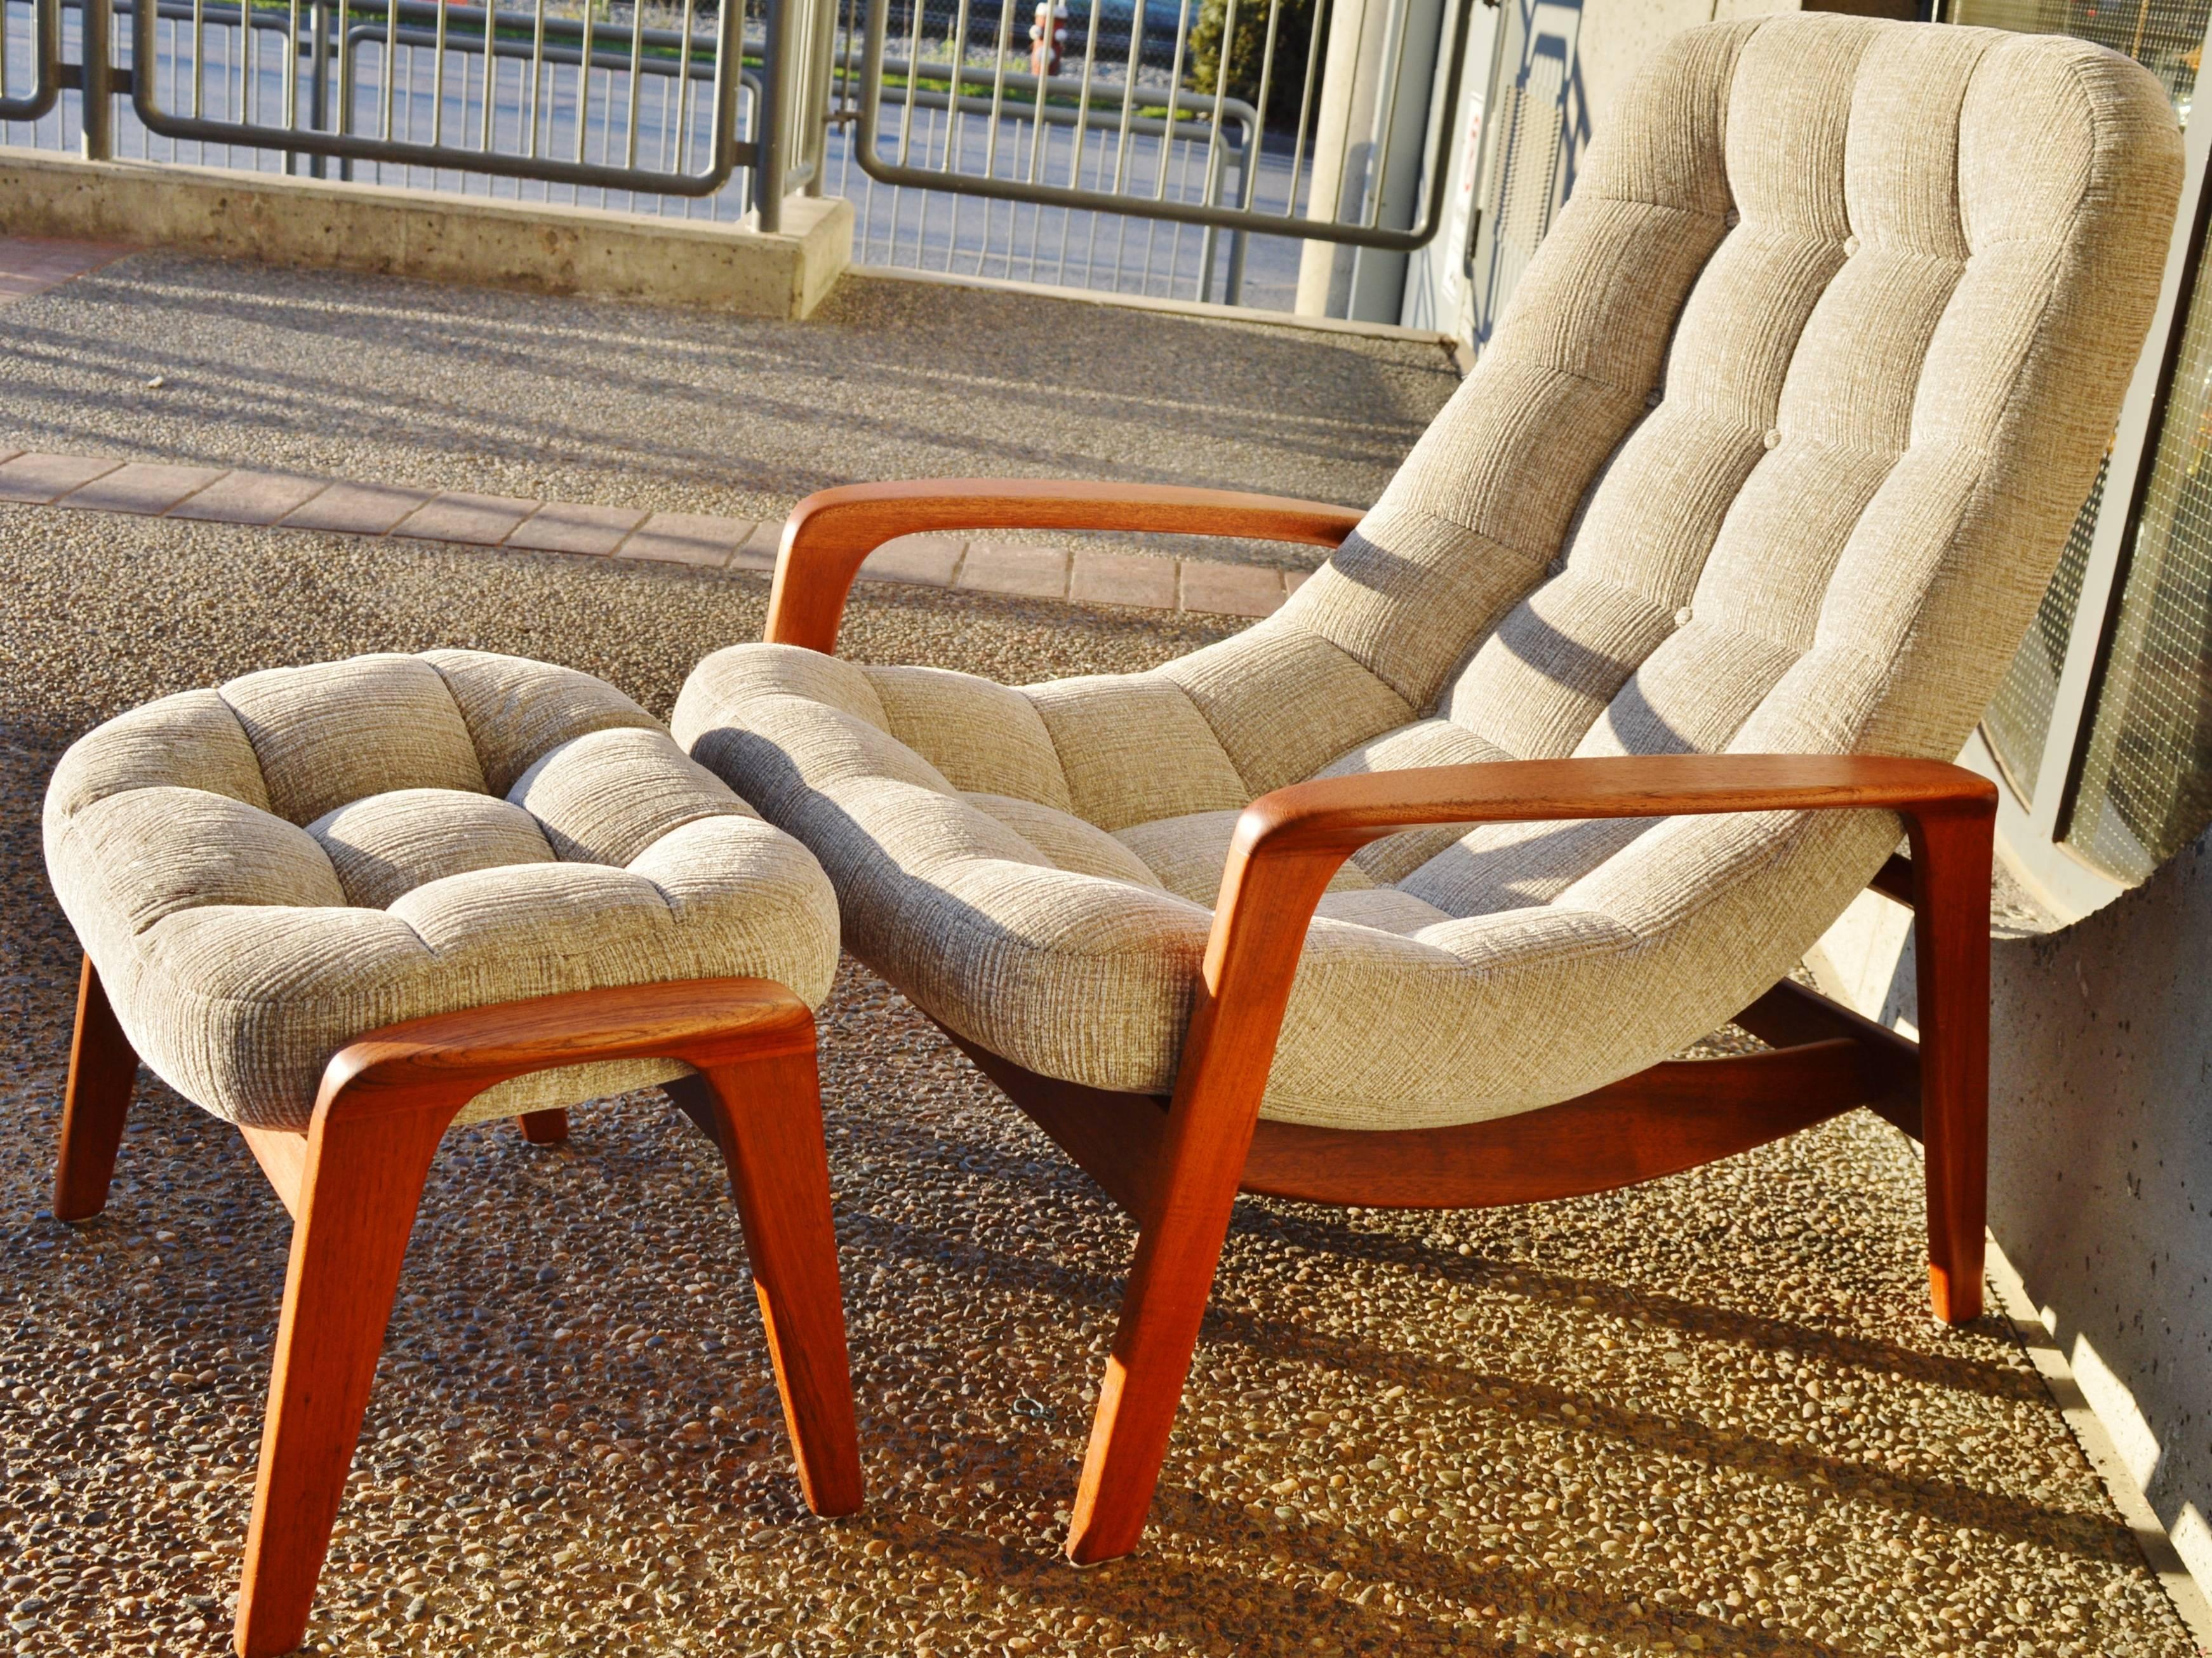 This fabulous Danish modern style teak frame lounger and ottoman were designer by R. Huber & Co. and are one of the most supremely comfortable lounge chairs ever! The curved back of the seat, the generous width, the flared armrests that match the